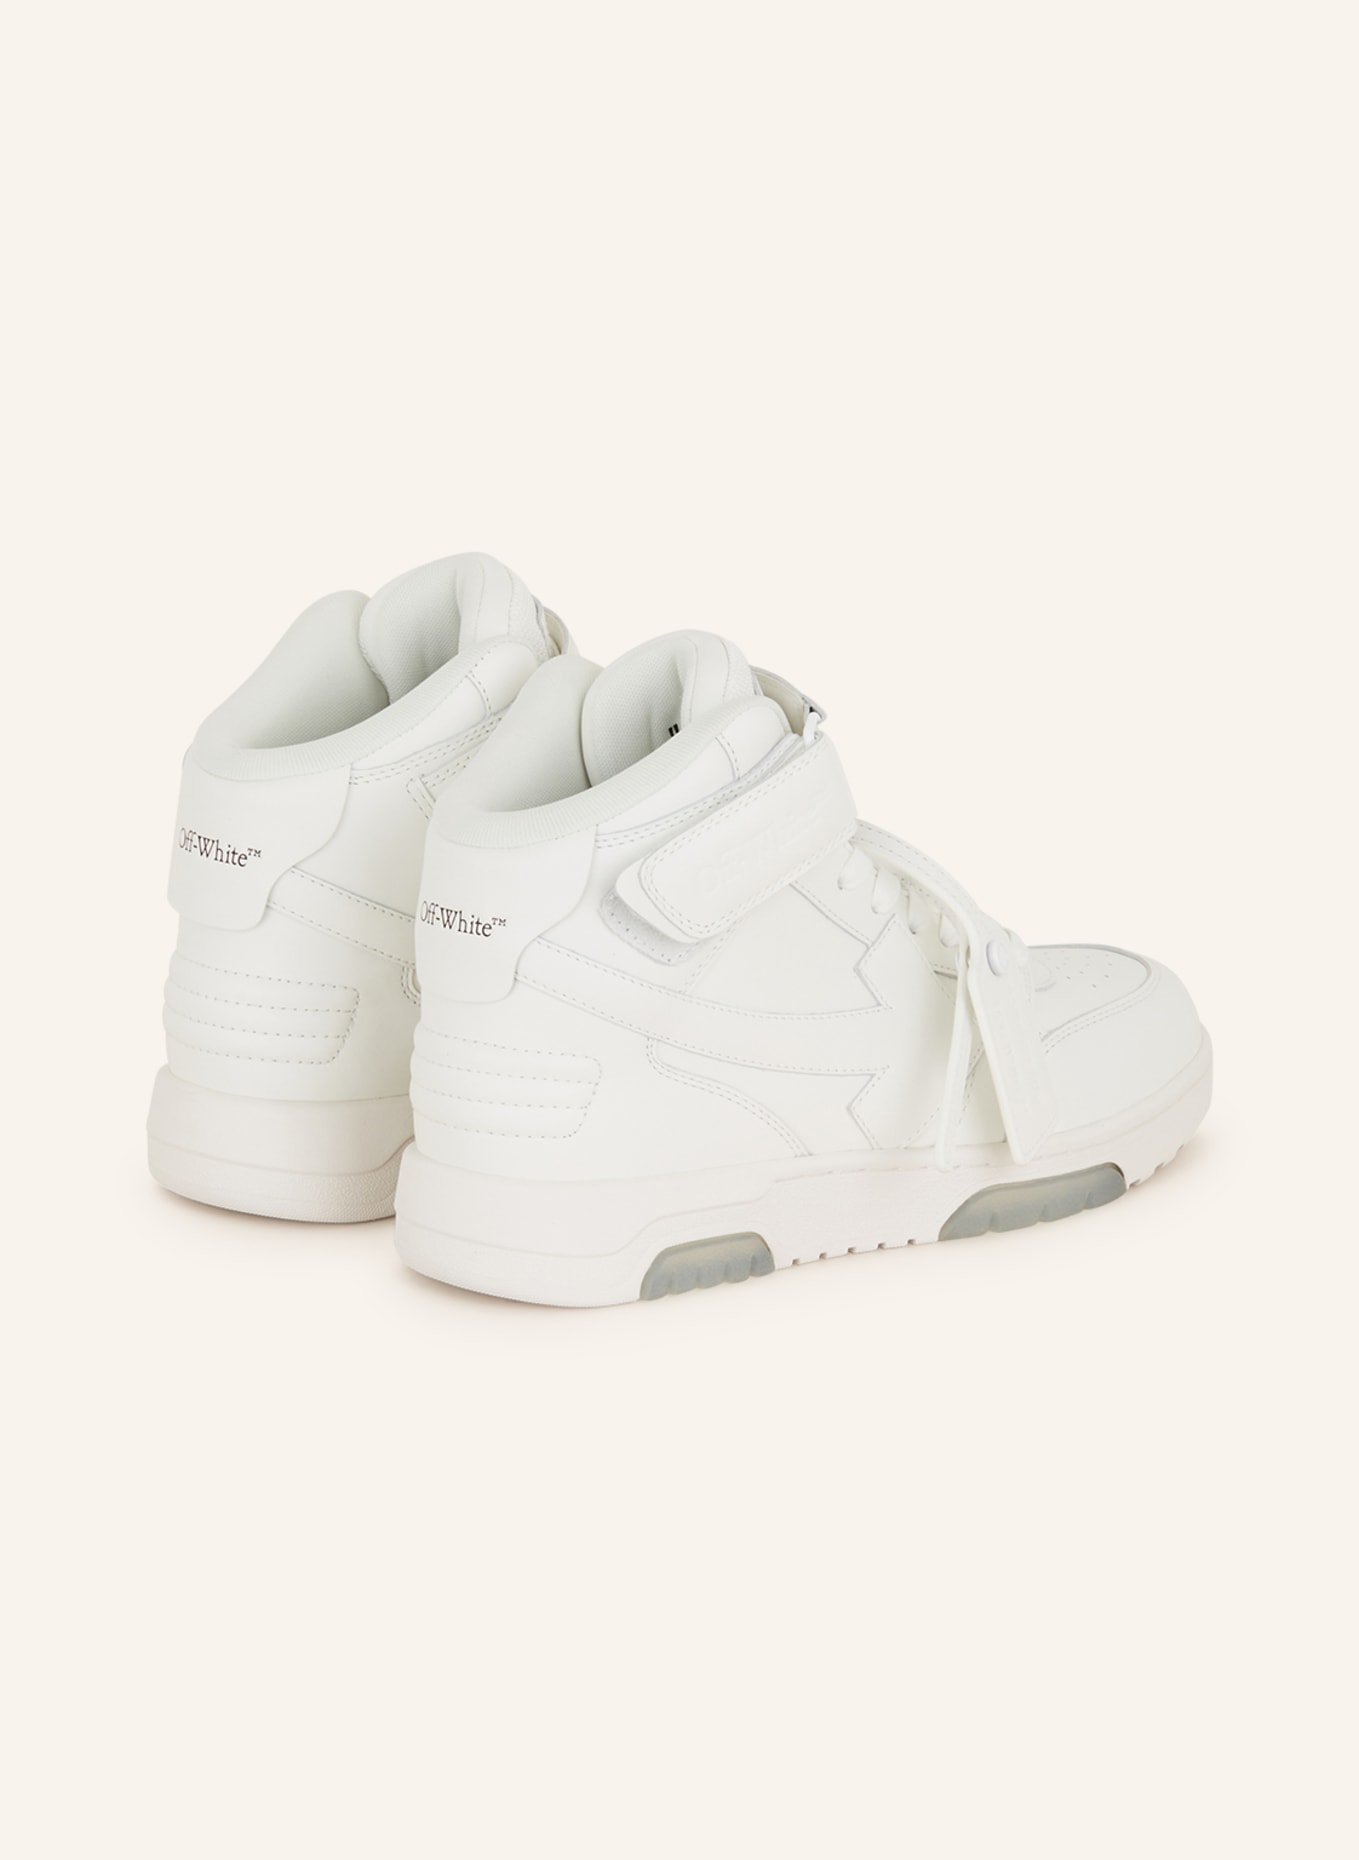 Off-White Hightop-Sneaker OUT OF OFFICE, Farbe: WEISS (Bild 2)